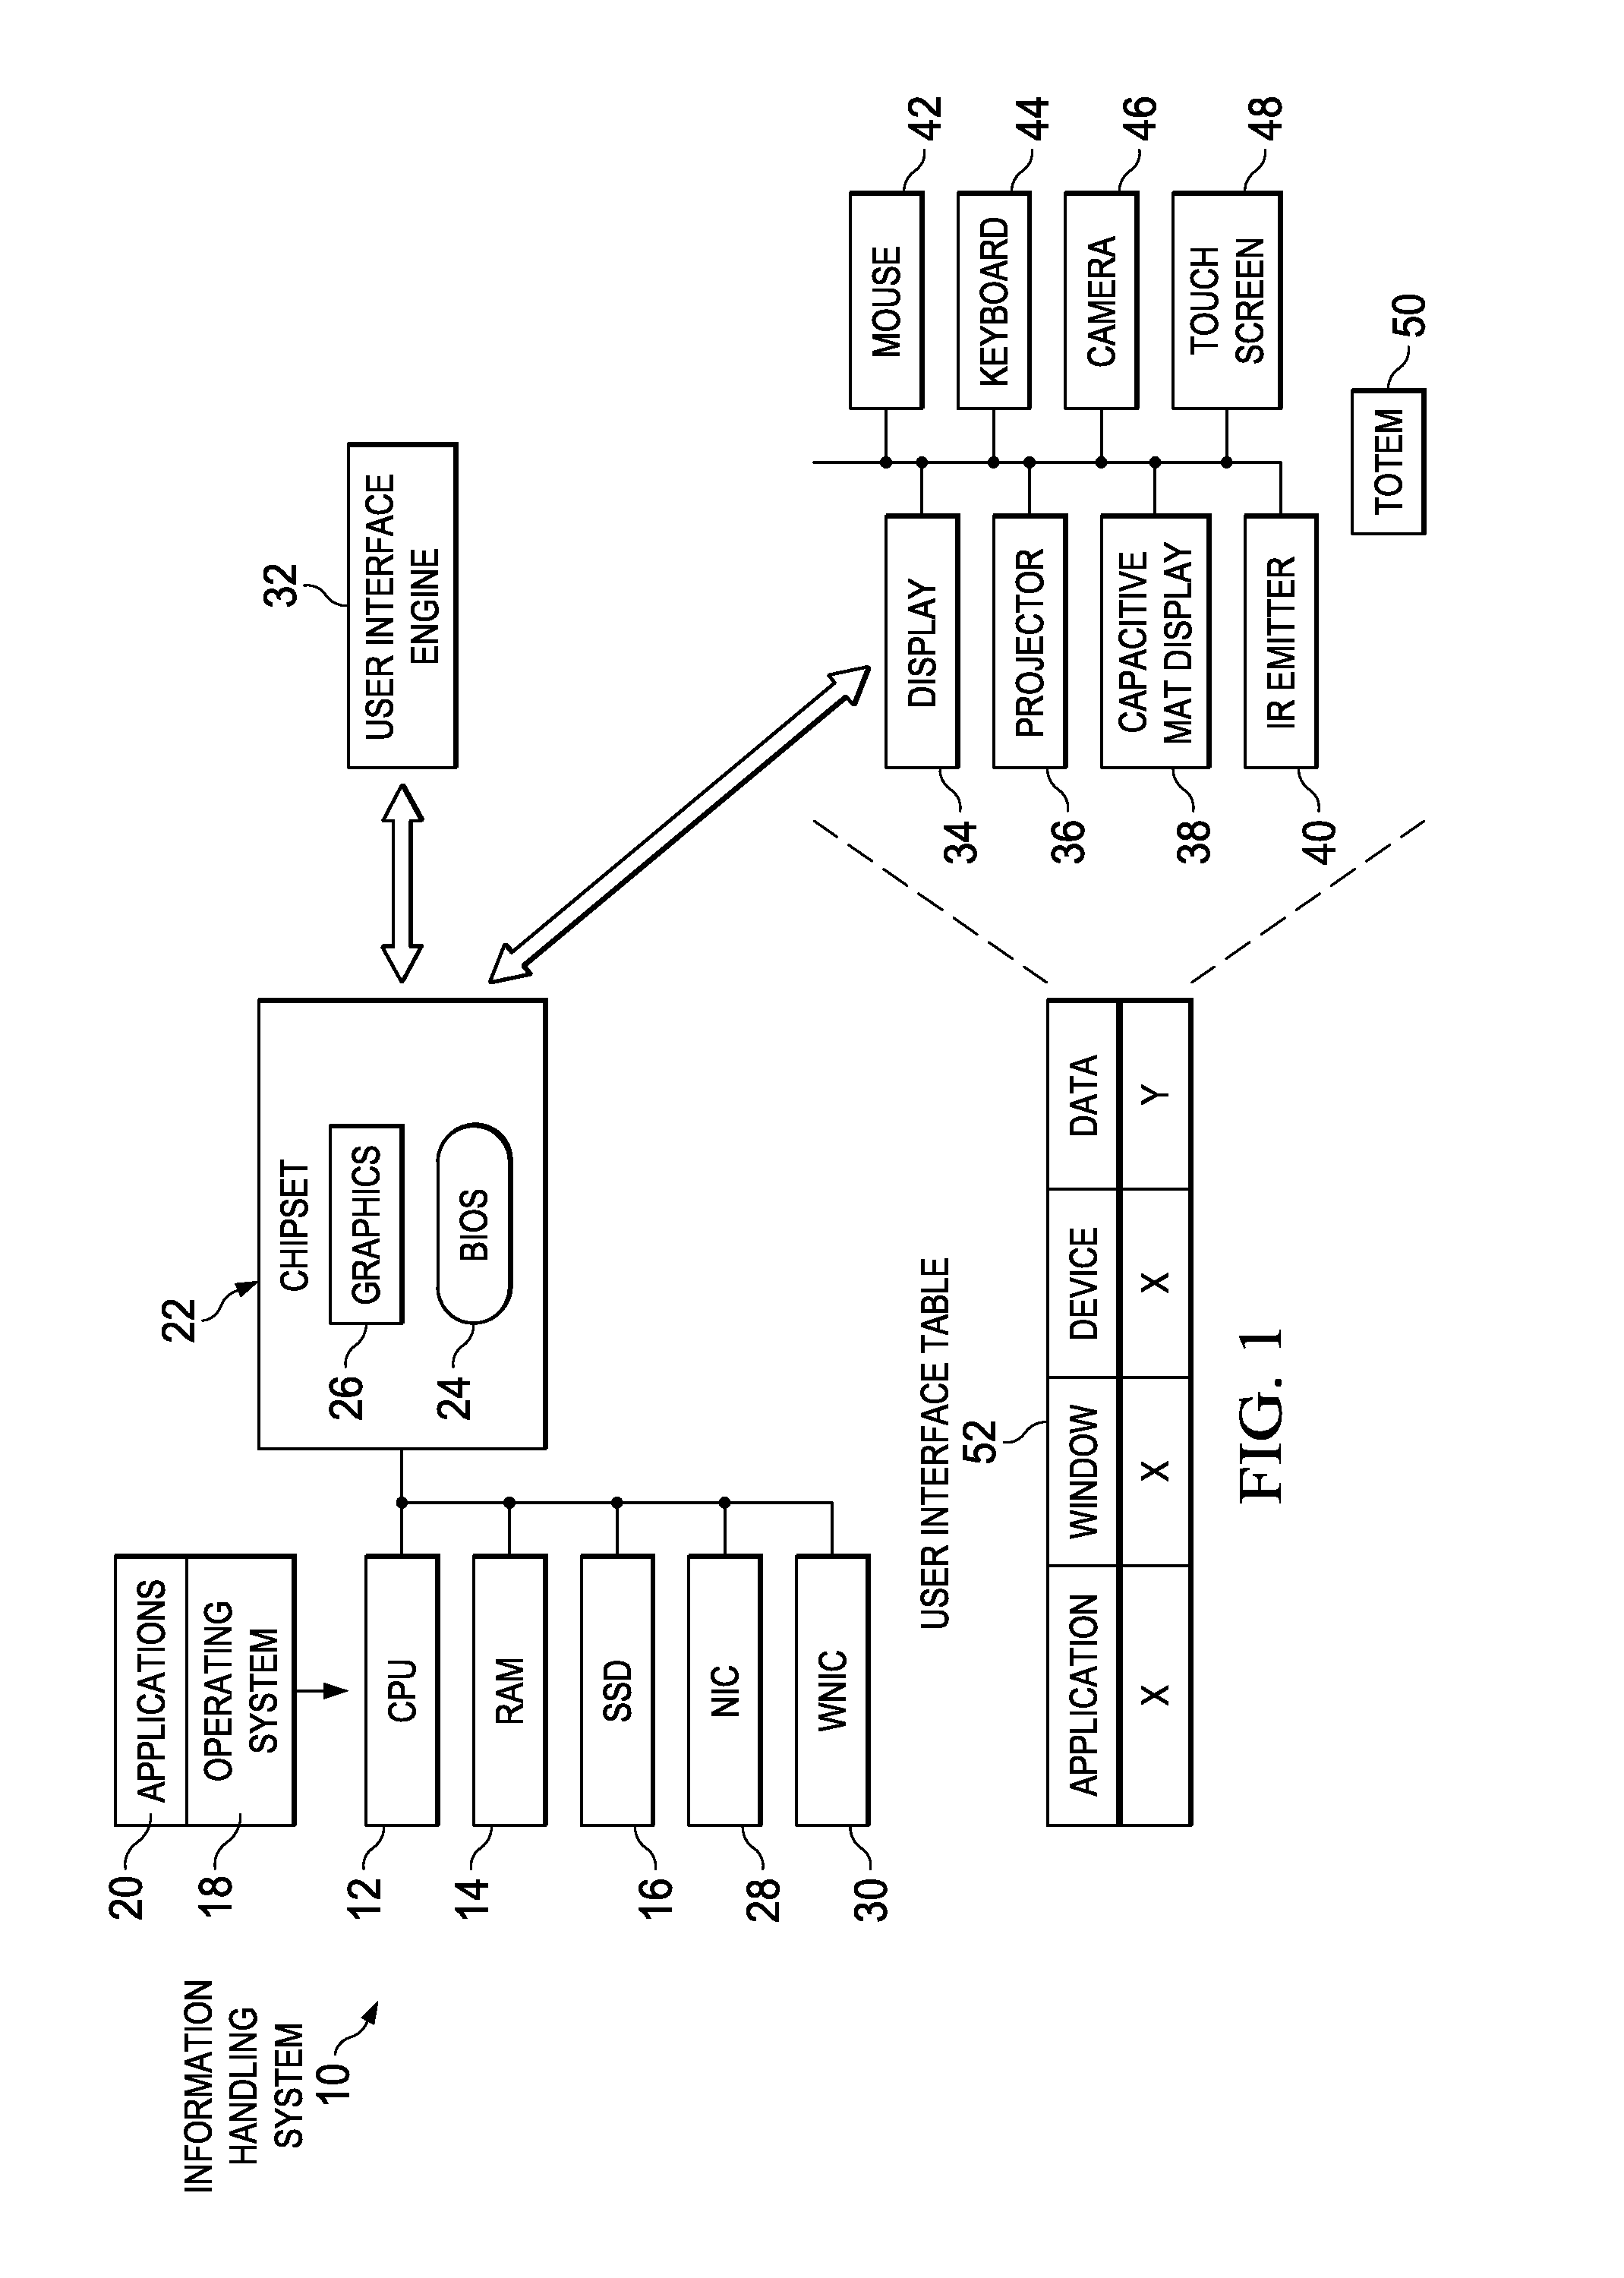 Capacitive Mat Information Handling System Display and Totem Interactions